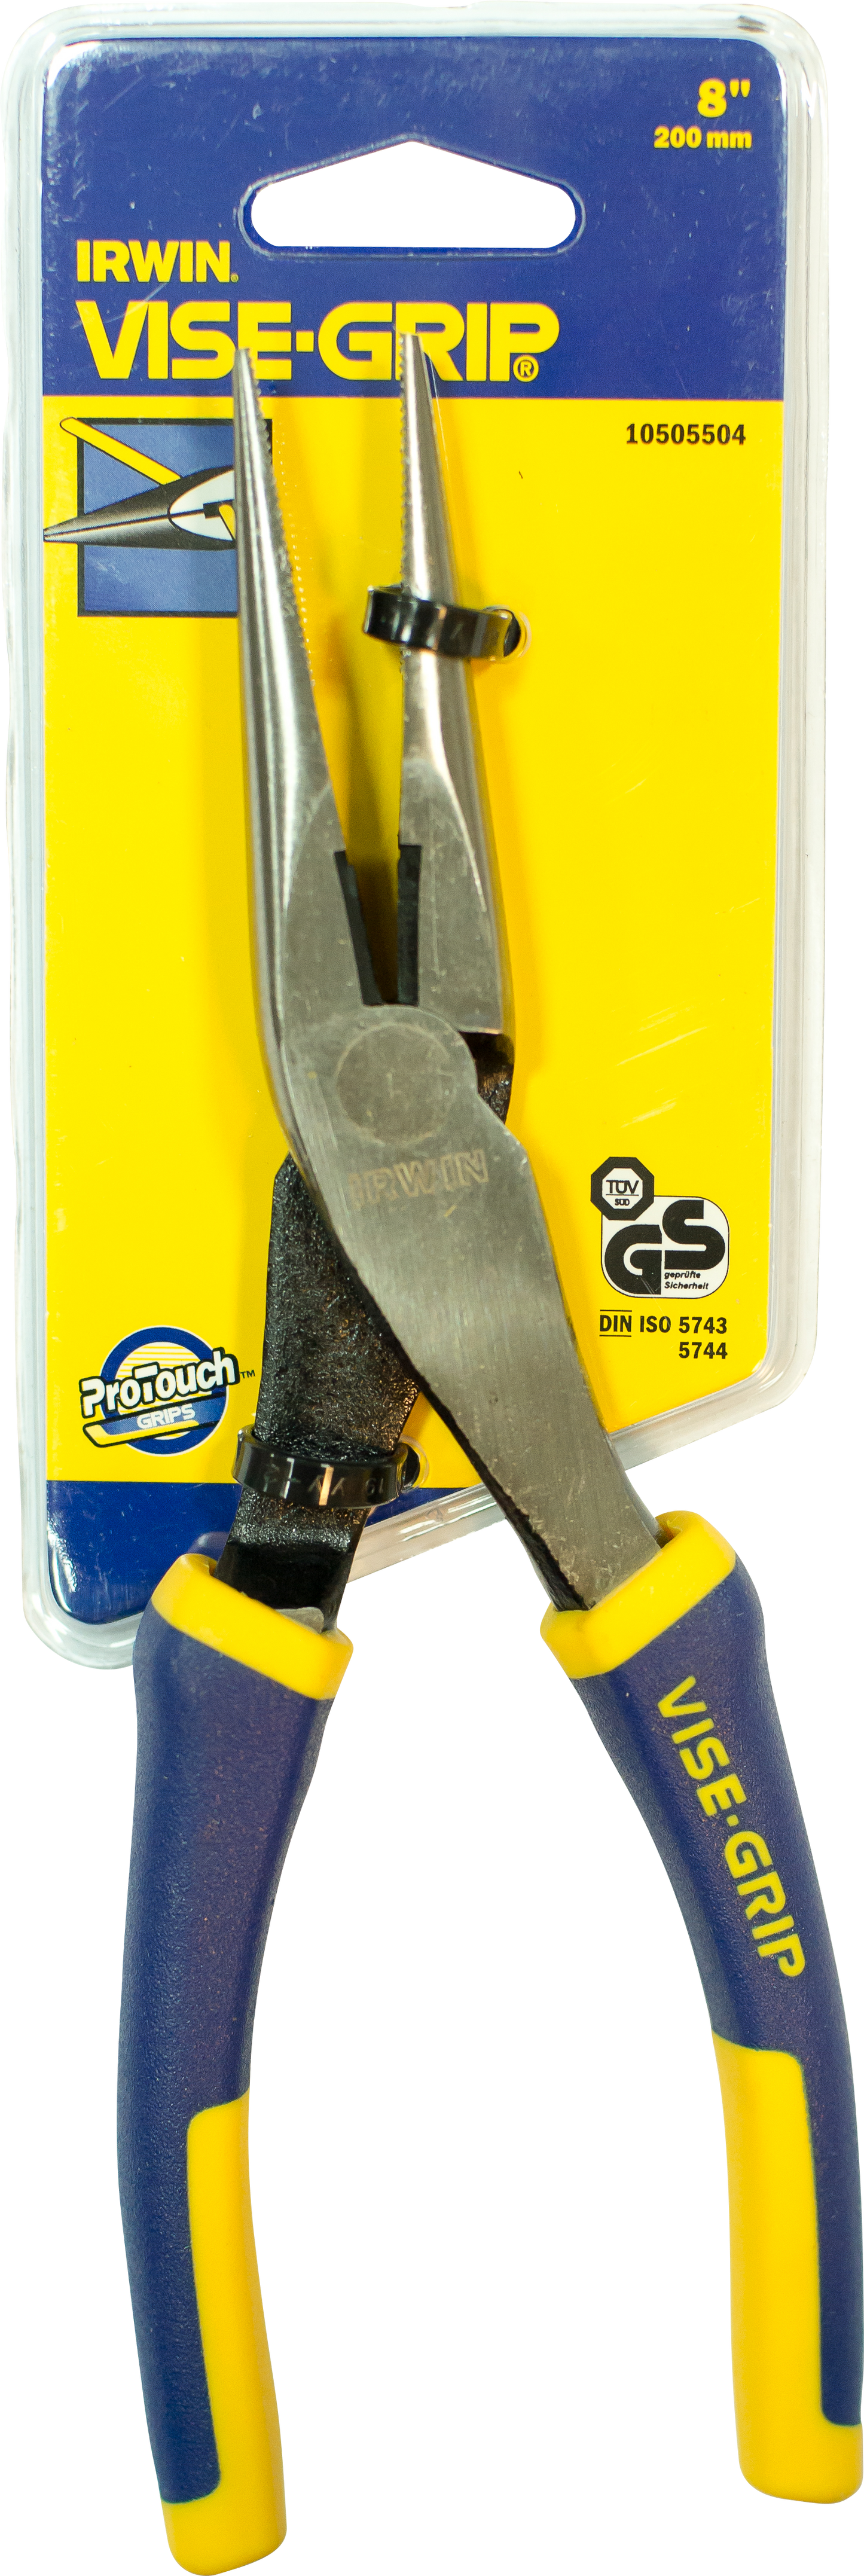 Irwin Vise-grip Long Nose Pliers 8in/200 mm